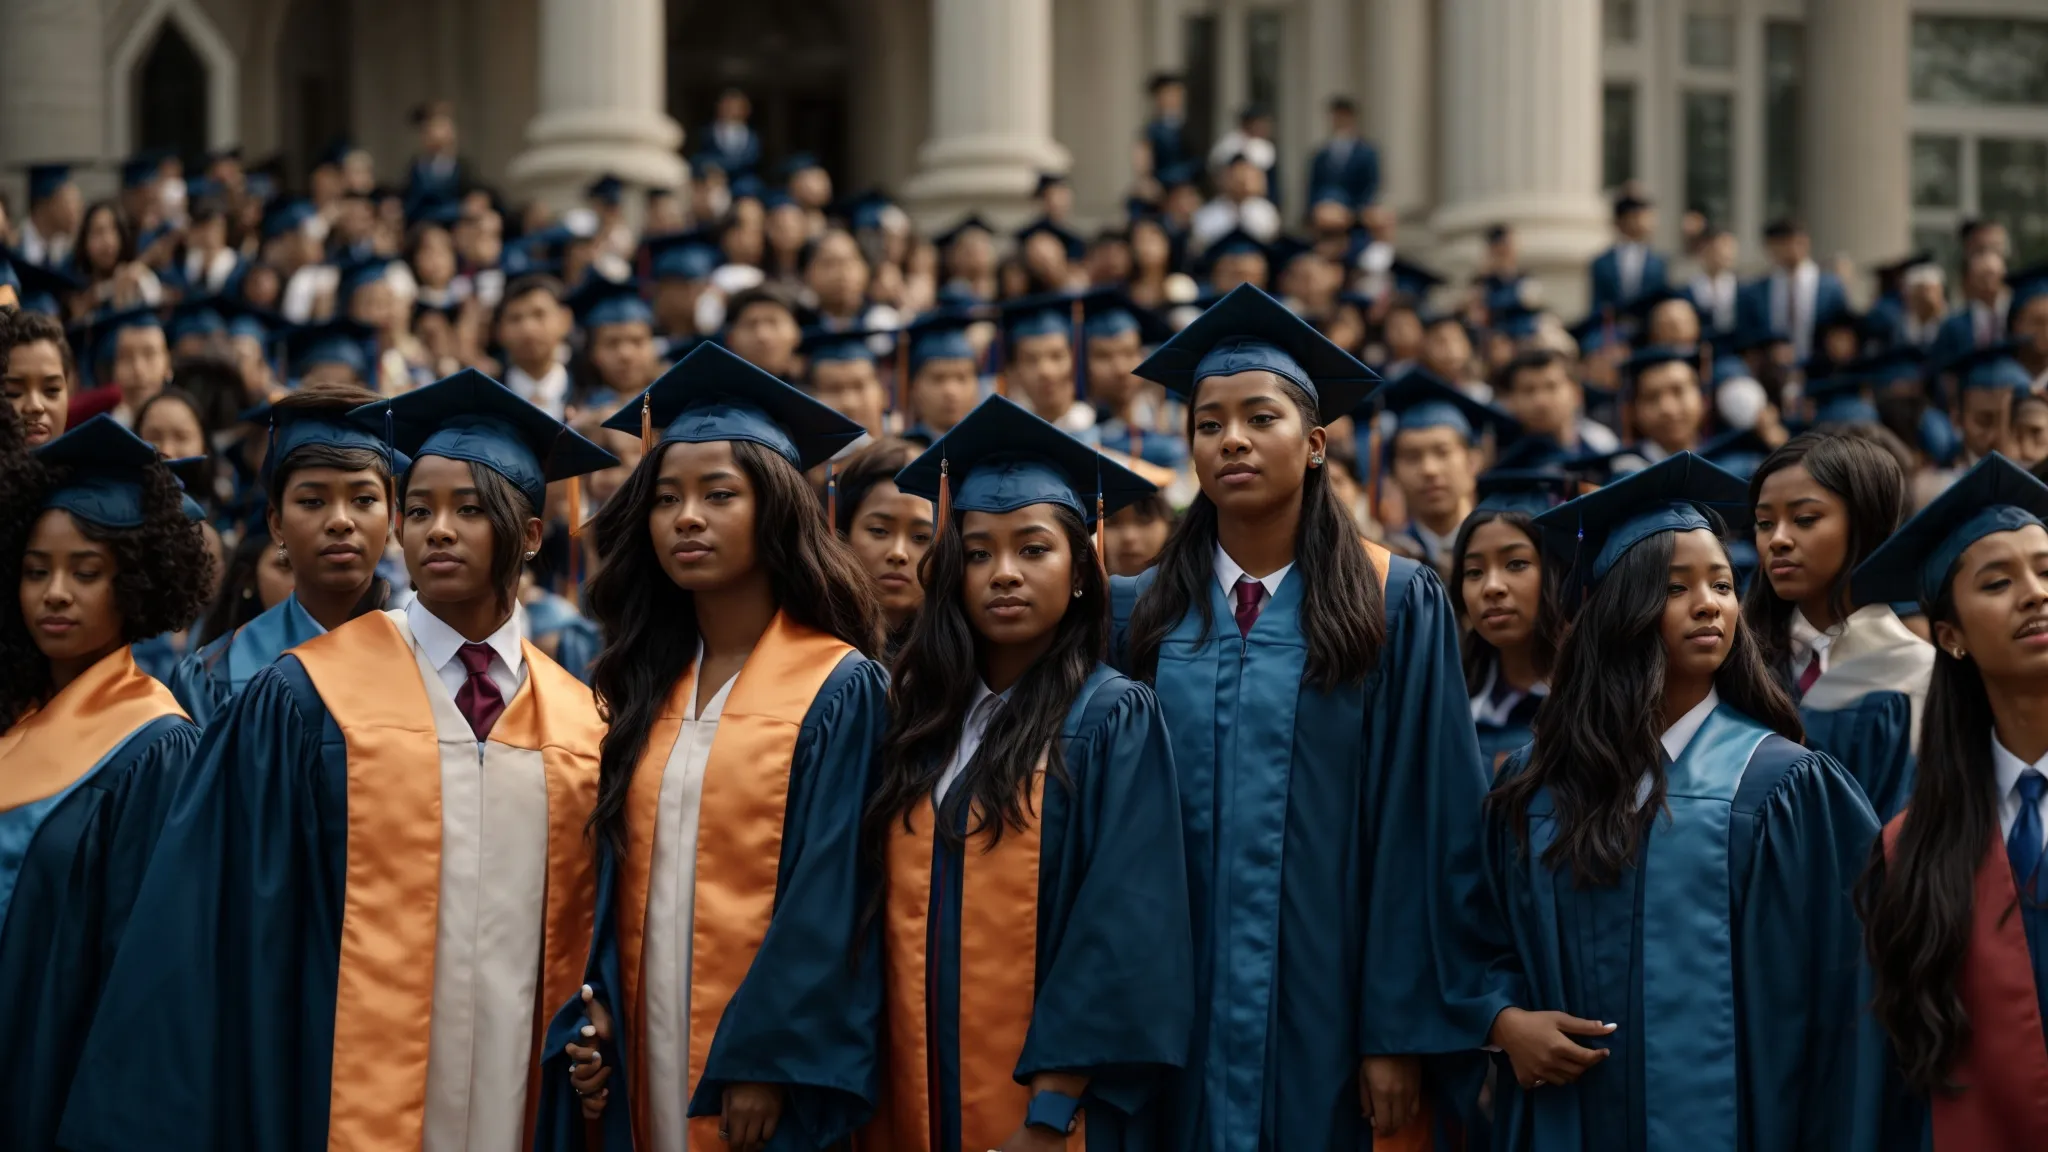 a diverse group of graduates, wearing caps and gowns, stands united on a university campus, symbolizing the evolution of education among future political leaders.